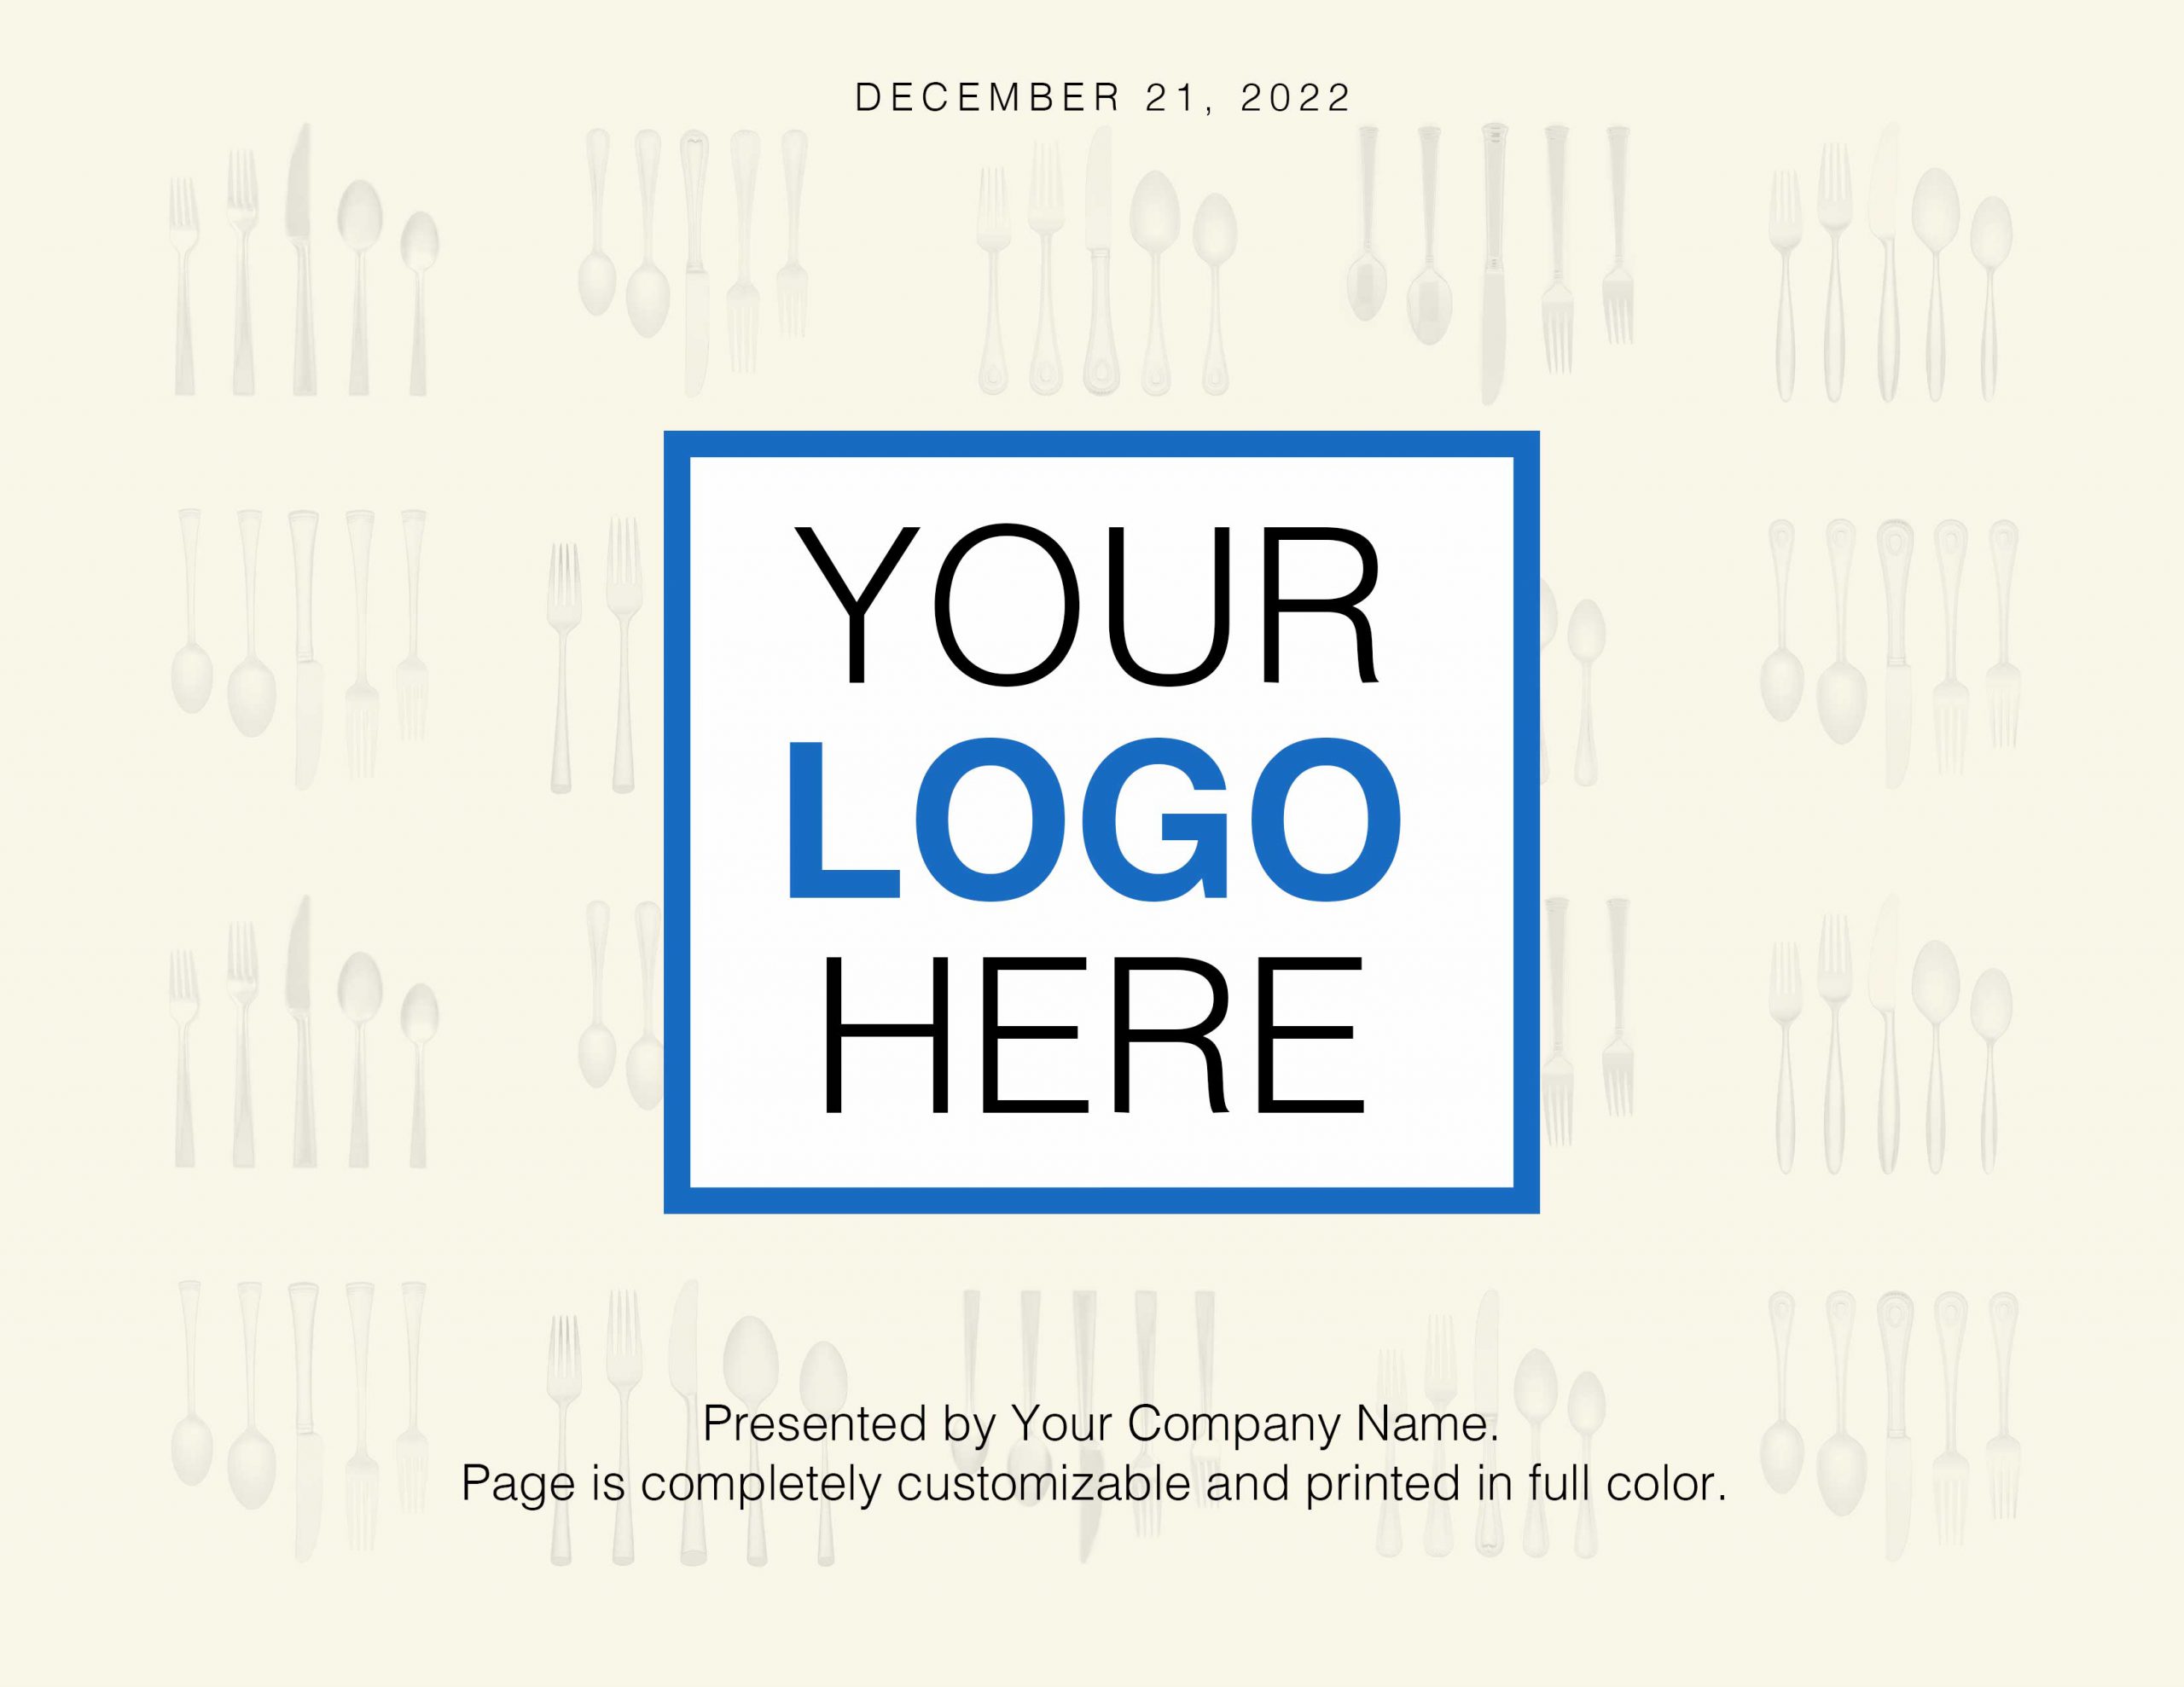 Reward Your Appetite - Branded with Your Company Logo